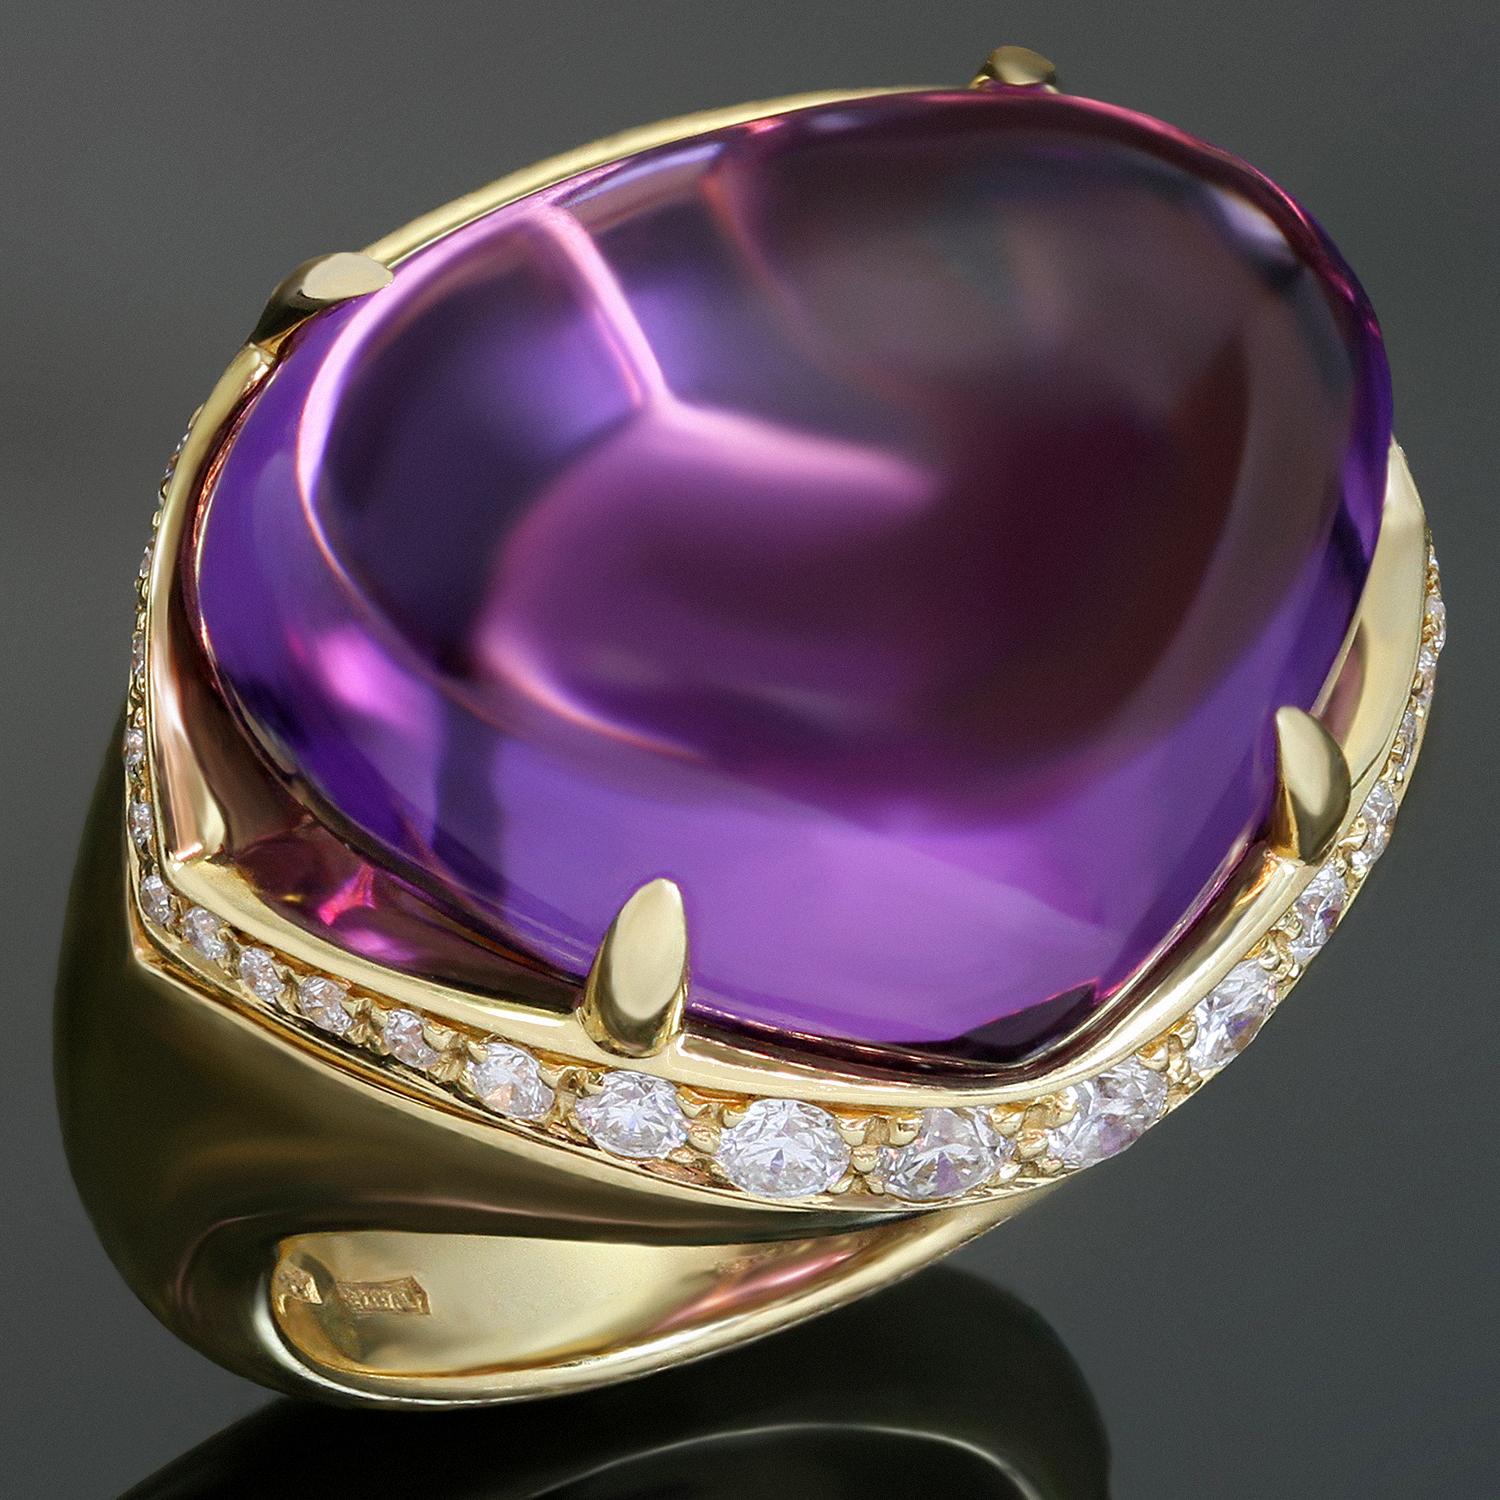 This chic Bulgari ring from the vibrant Sassi collection is crafted in 18k yellow gold and features a pear-shaped 16.50mm x 19.15mm cabochon amethyst, accented with brilliant-cut round E-F VVS2-VS1 diamonds weighing an estiamted 0.66 carats. Marked